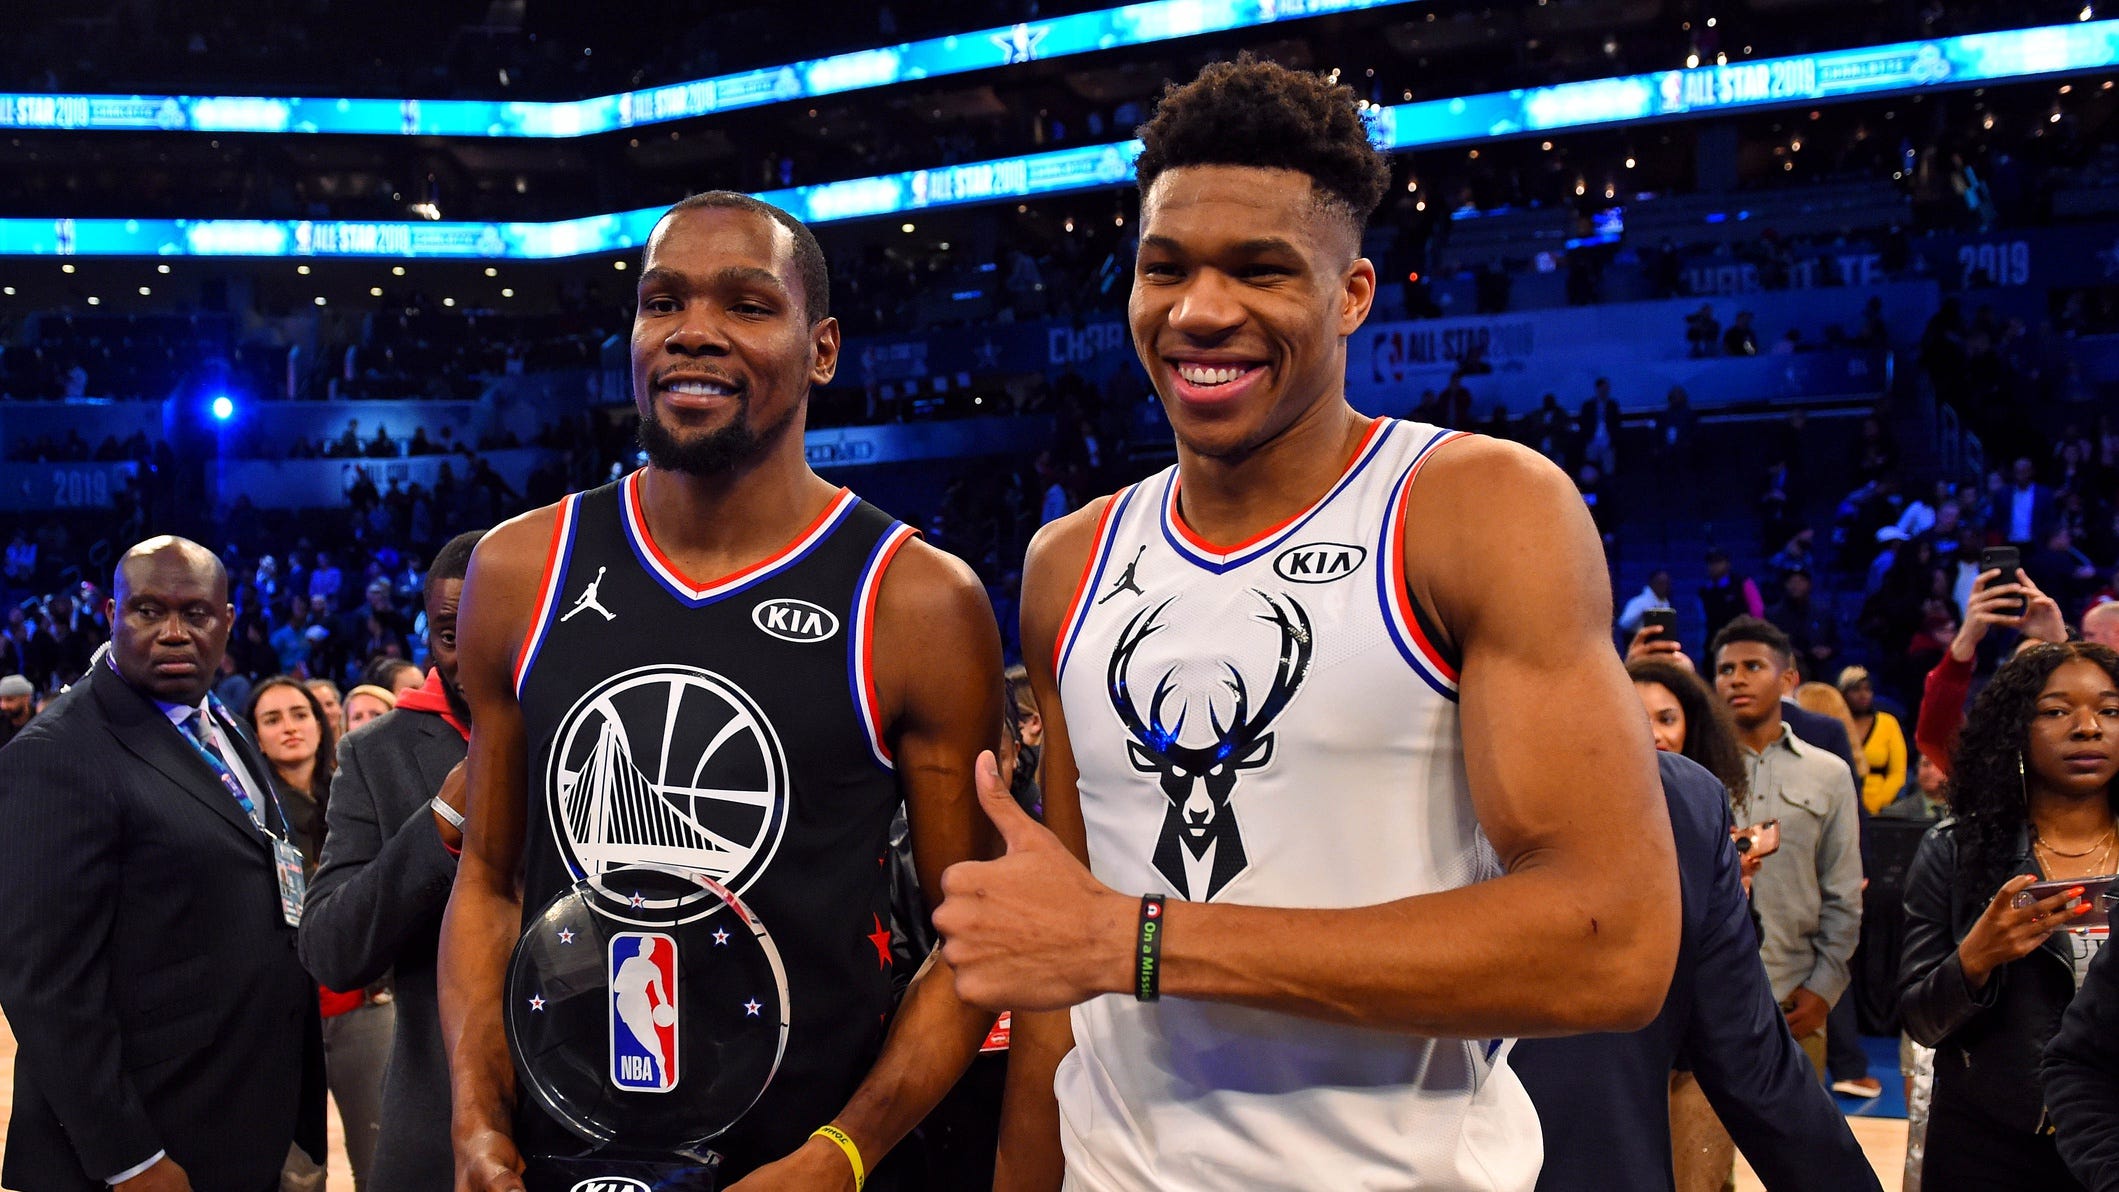 Giannis vs. Kevin Durant Is Nets or Bucks star the bigger threat?